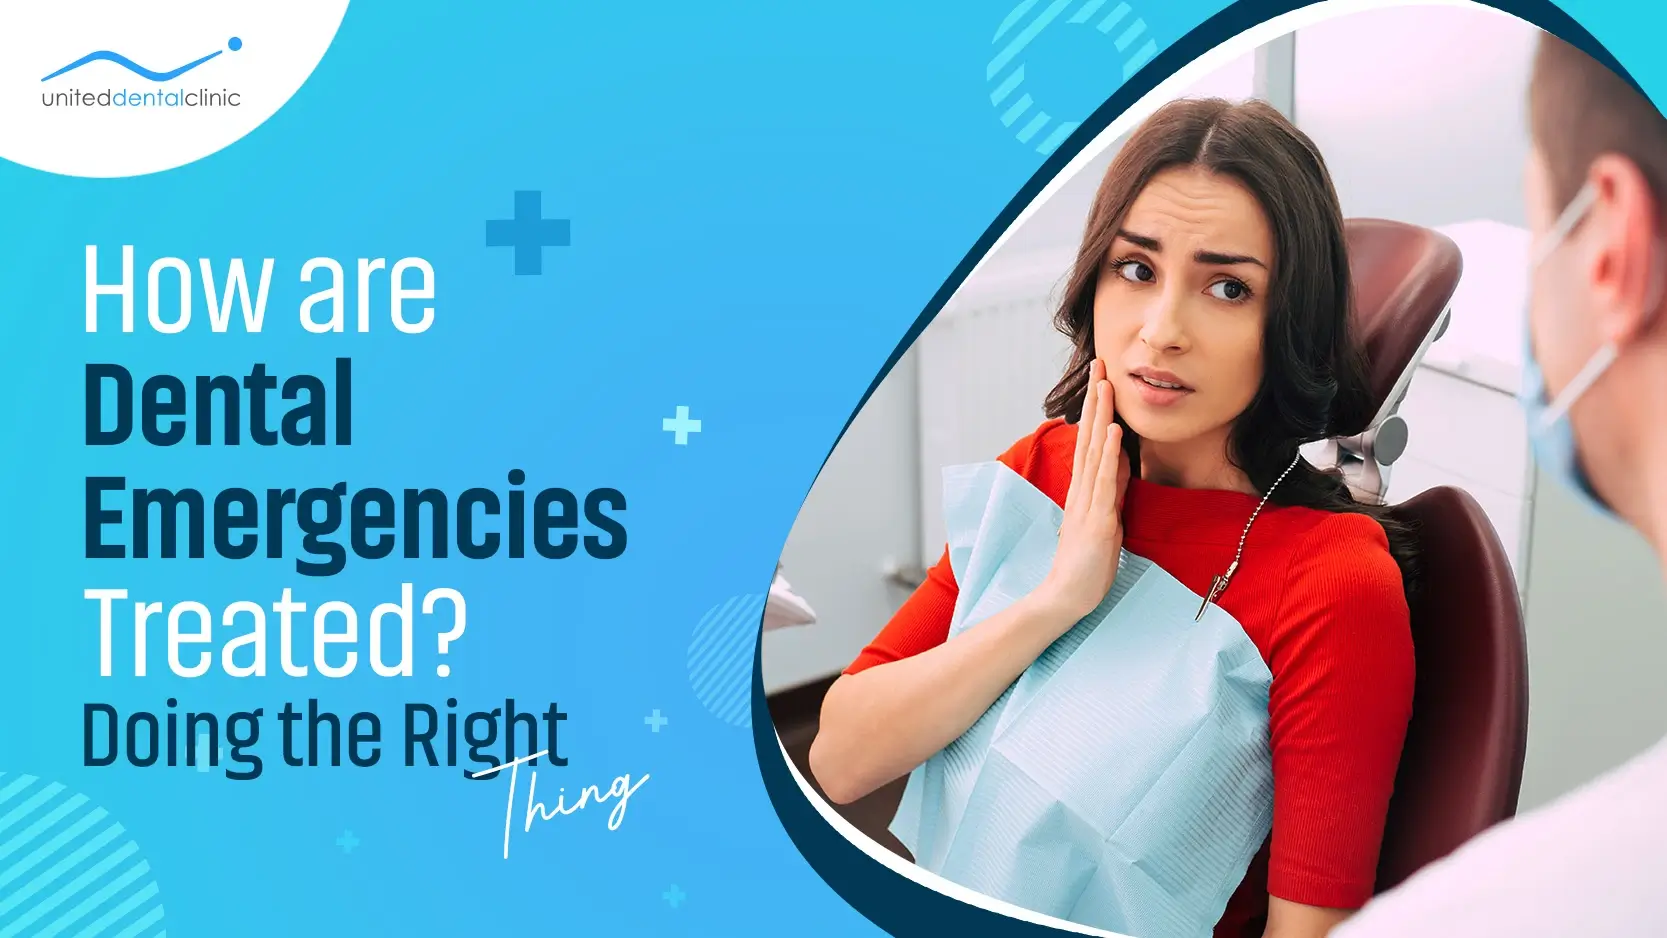 How Are Dental Emergencies Treated? Doing the Right Thing